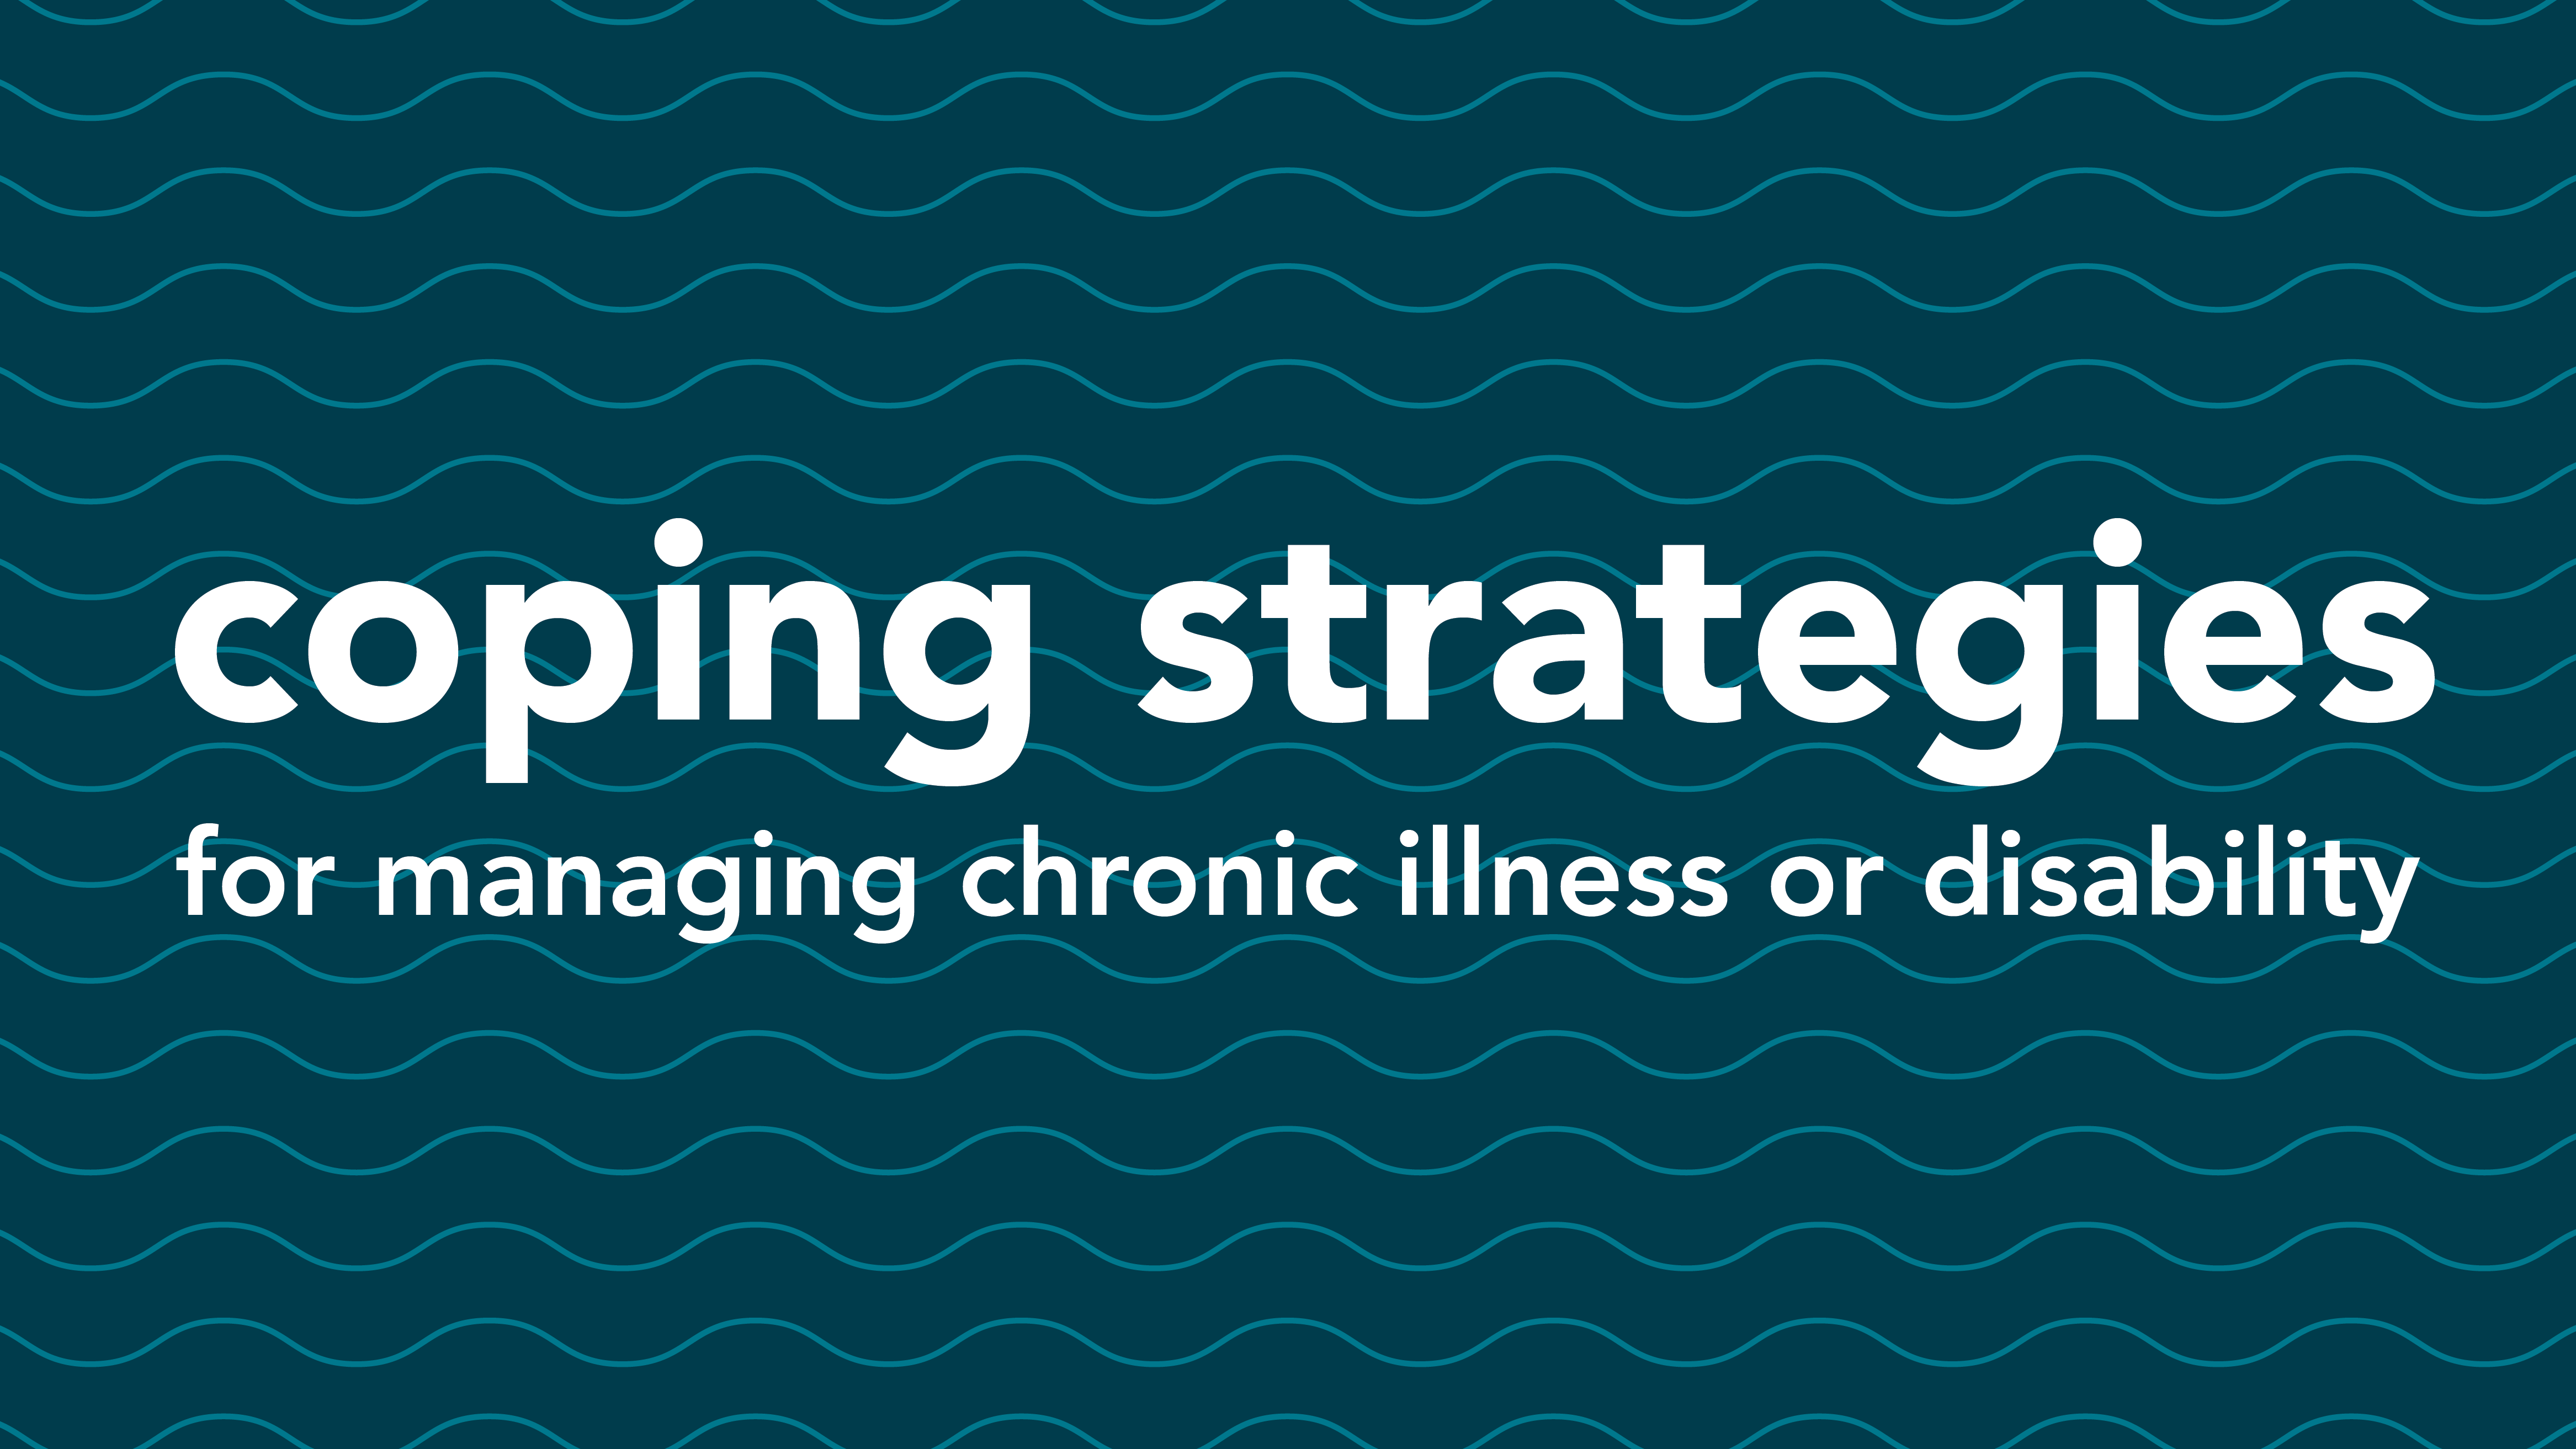 Coping strategies for managing chronic illness or disability